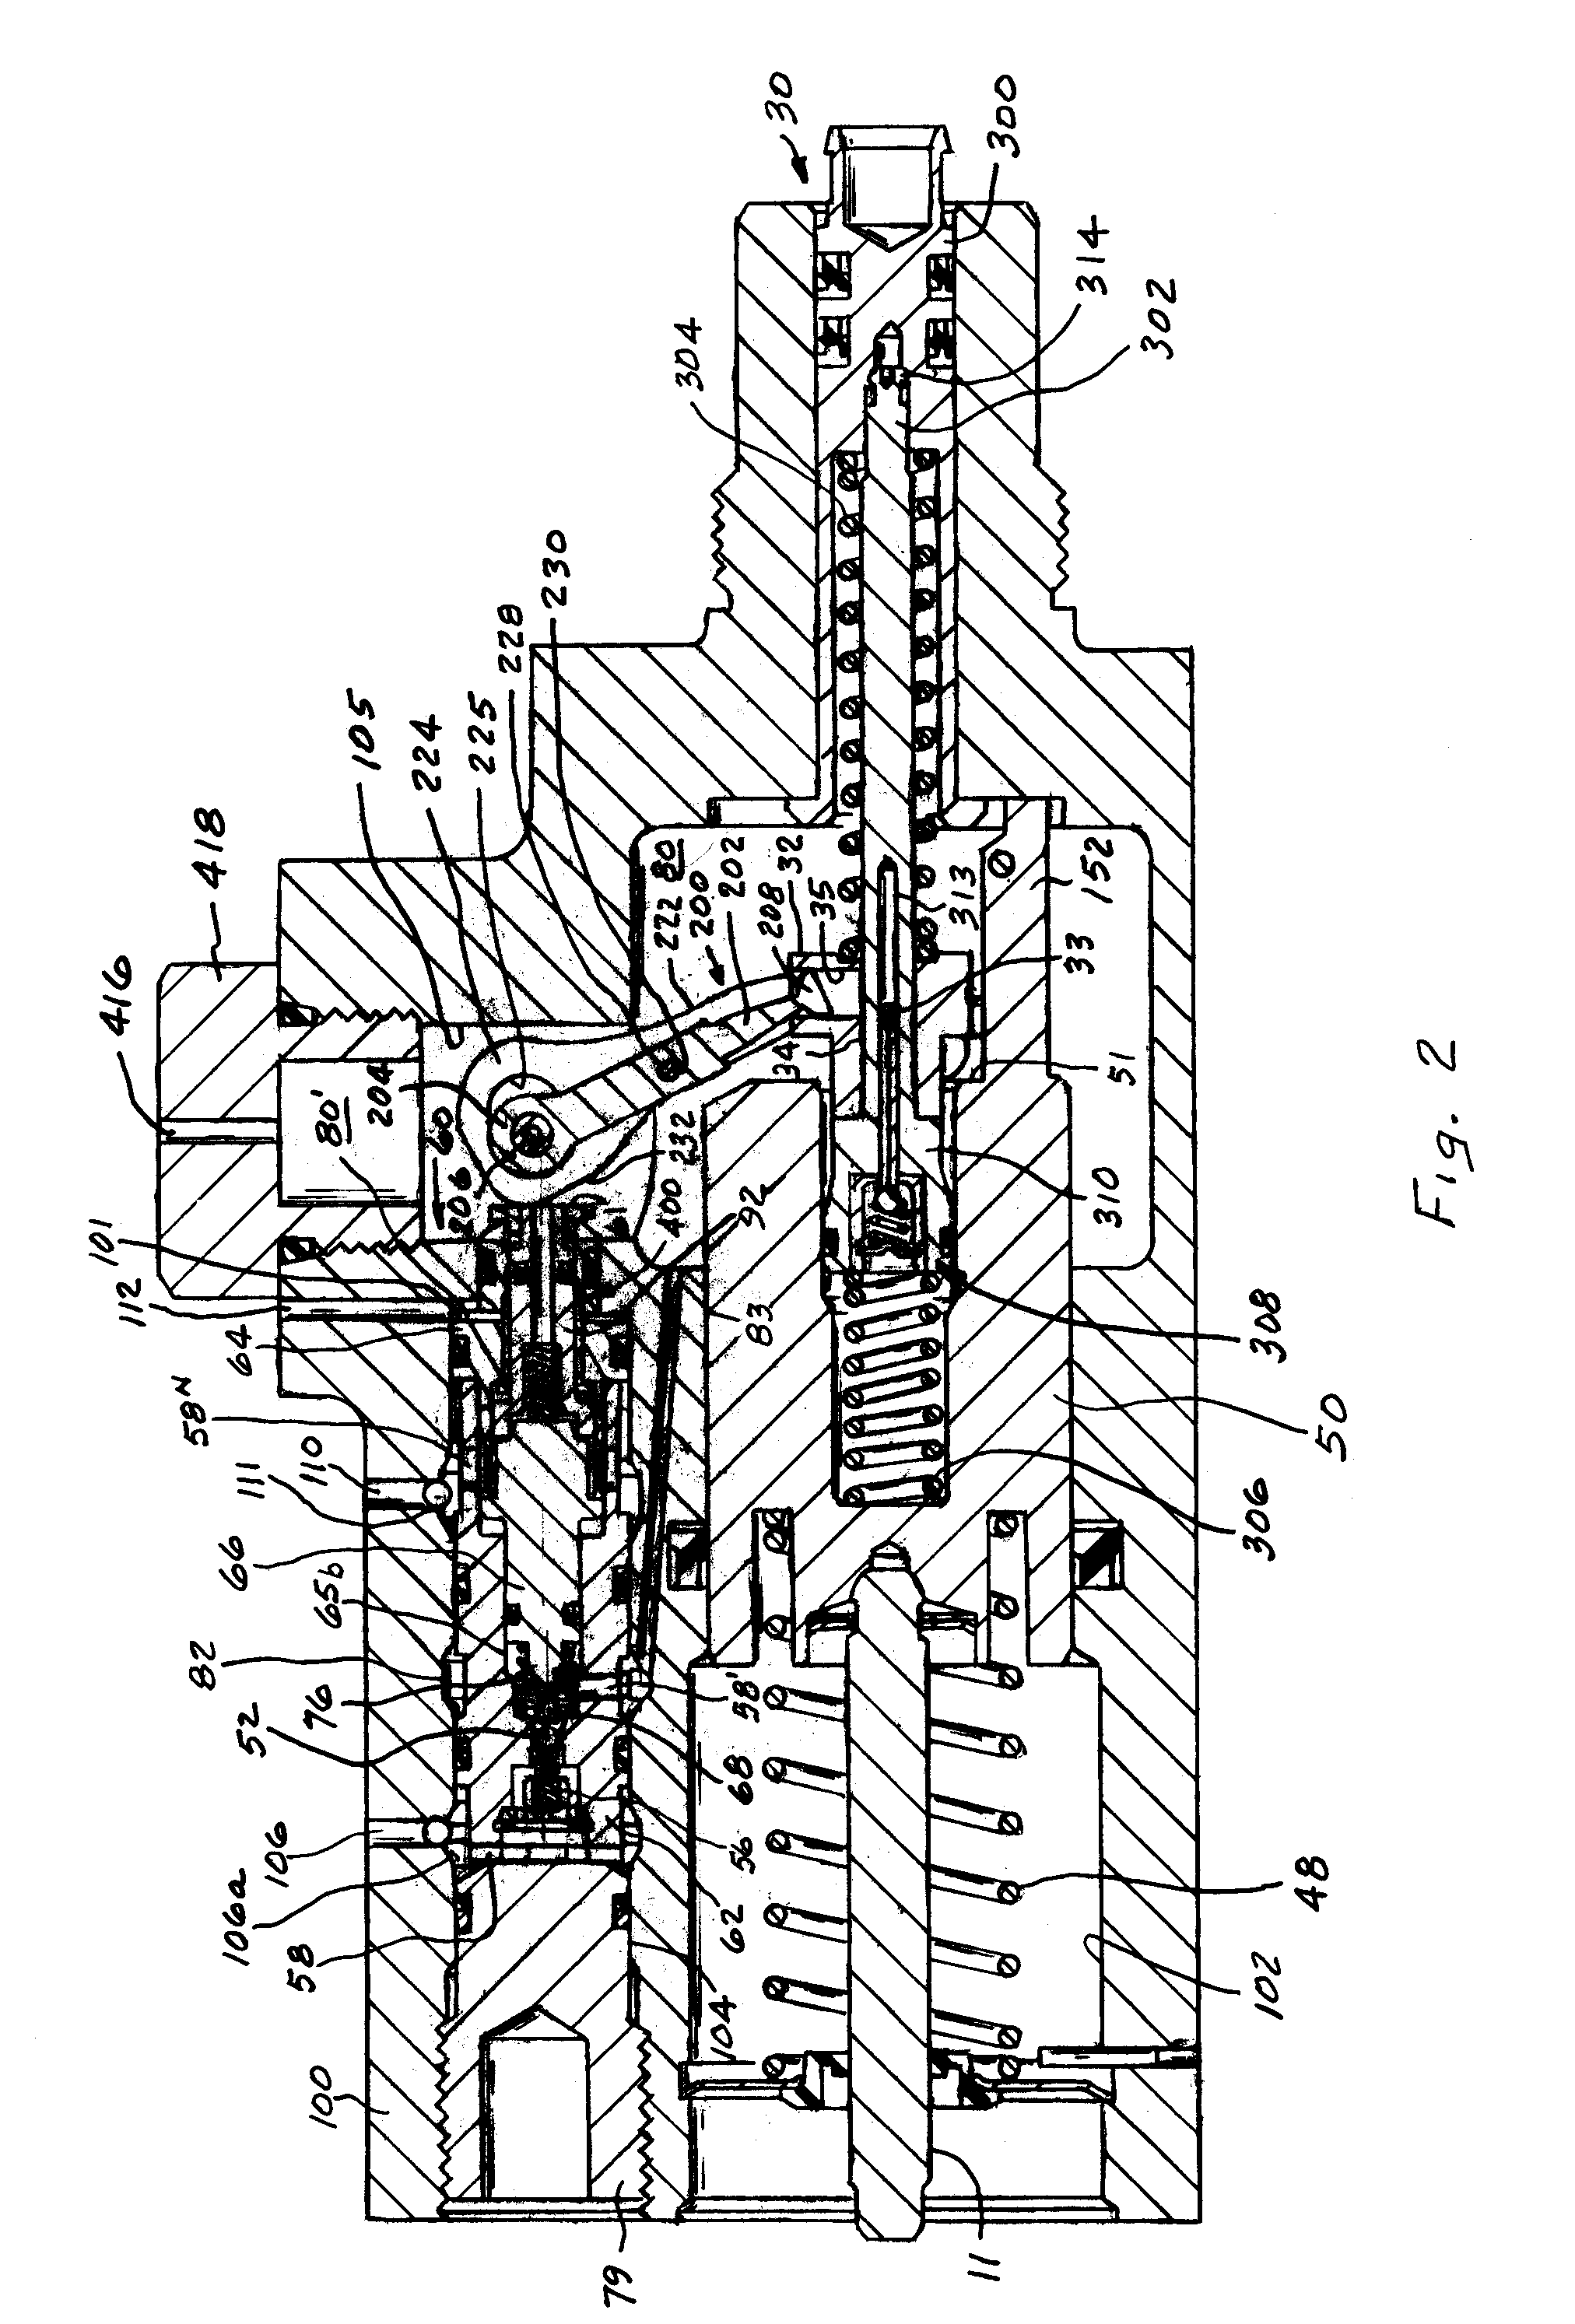 Control valve for a hydraulic brake booster